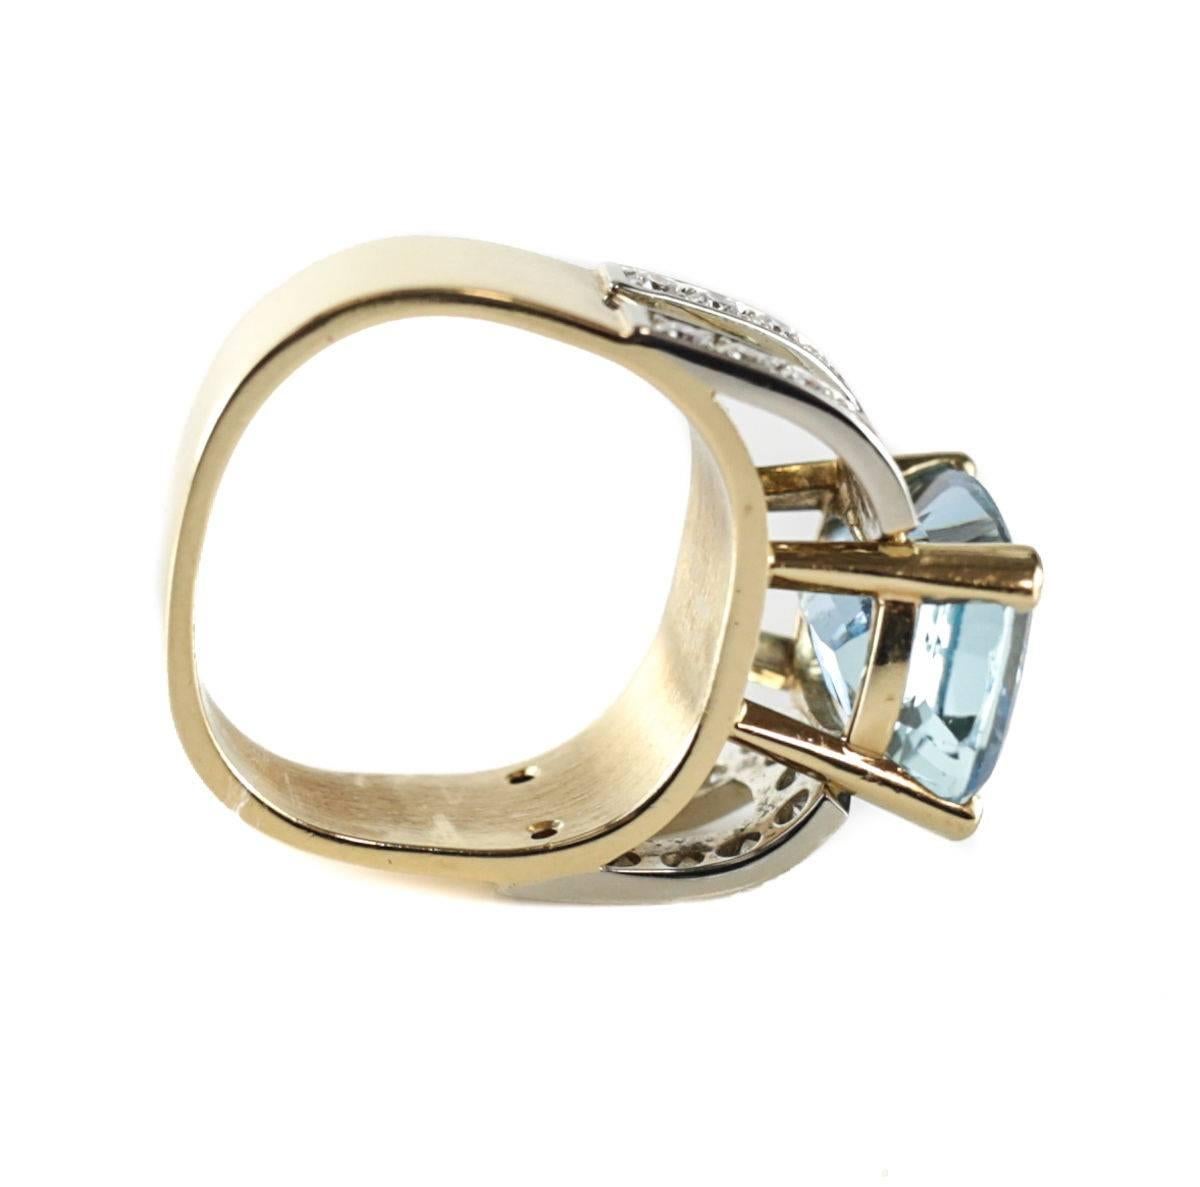 A stunning Jean-Francois Albert 18 karat yellow and white gold, diamond and 5 carat aquamarine signature fit ring. The beautiful aquamarine stone of a gem quality in medium light blue with moderately strong intensity in a rectangular cushion cut. 24